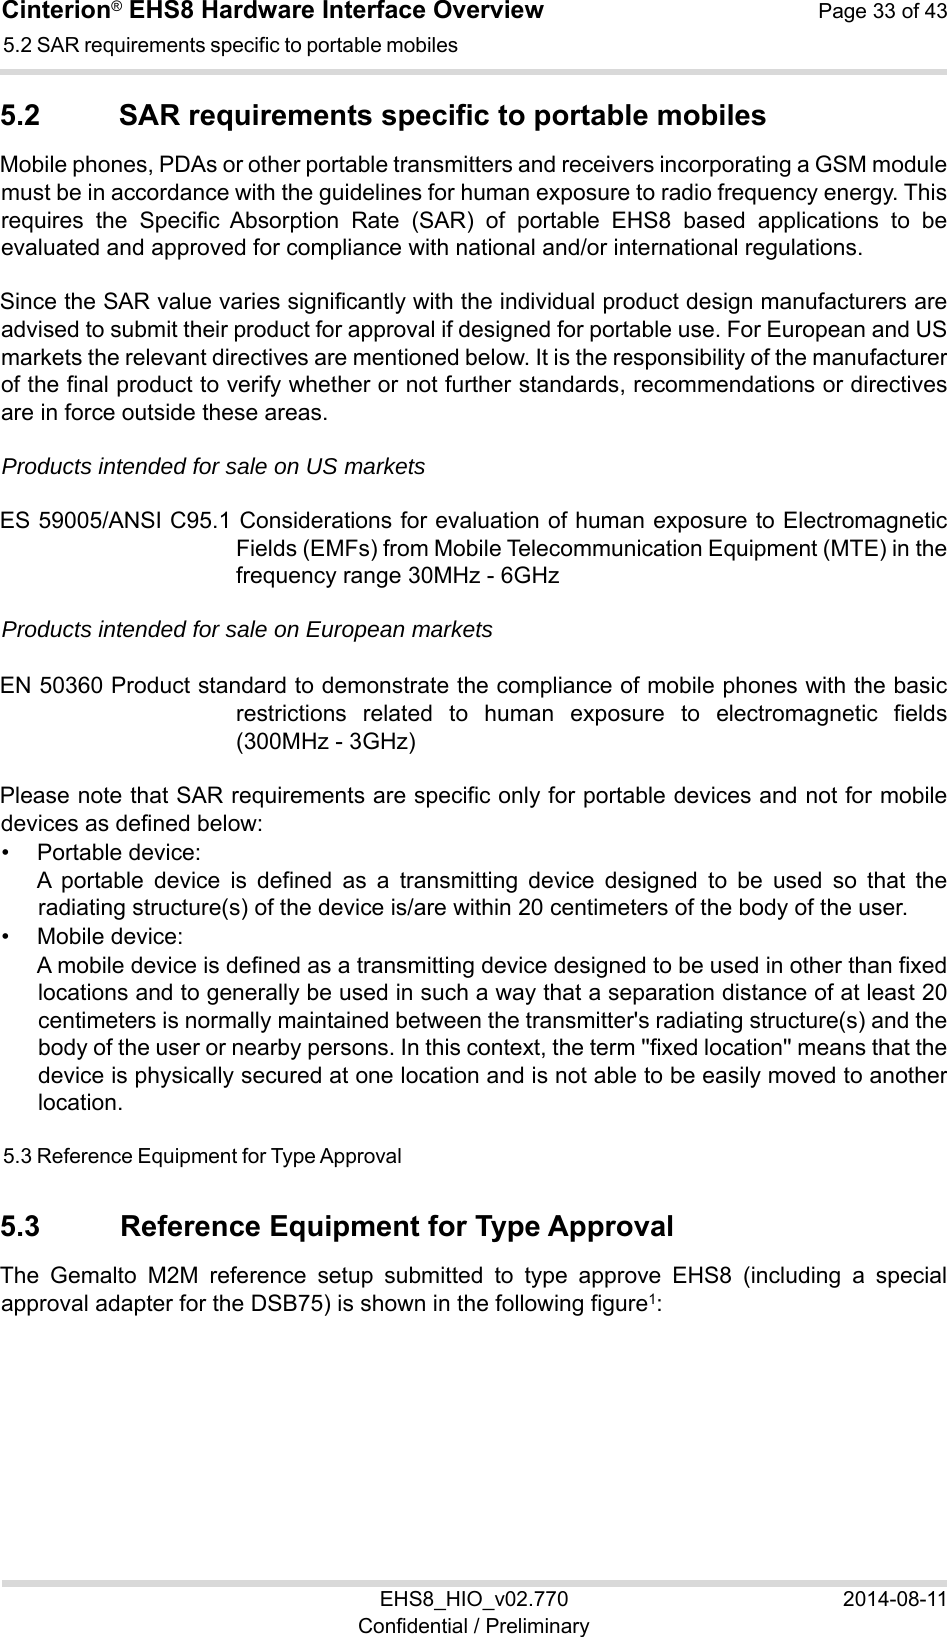 Cinterion® EHS8 Hardware Interface Overview  Page 33 of 43 EHS8_HIO_v02.770  2014-08-11 Confidential / Preliminary 5.2 SAR requirements specific to portable mobiles 34 5.2  SAR requirements specific to portable mobiles Mobile phones, PDAs or other portable transmitters and receivers incorporating a GSM module must be in accordance with the guidelines for human exposure to radio frequency energy. This requires  the  Specific  Absorption  Rate  (SAR)  of  portable  EHS8  based  applications  to  be evaluated and approved for compliance with national and/or international regulations.  Since the SAR value varies significantly with the individual product design manufacturers are advised to submit their product for approval if designed for portable use. For European and US markets the relevant directives are mentioned below. It is the responsibility of the manufacturer of the final product to verify whether or not further standards, recommendations or directives are in force outside these areas.  Products intended for sale on US markets ES 59005/ANSI C95.1 Considerations for evaluation of human exposure to Electromagnetic Fields (EMFs) from Mobile Telecommunication Equipment (MTE) in the frequency range 30MHz - 6GHz  Products intended for sale on European markets EN 50360 Product standard to demonstrate the compliance of mobile phones with the basic restrictions  related  to  human  exposure  to  electromagnetic  fields (300MHz - 3GHz) Please note that SAR requirements are specific only for portable devices and not for mobile devices as defined below: •  Portable device: A  portable  device  is  defined  as  a  transmitting  device  designed  to  be  used  so  that  the radiating structure(s) of the device is/are within 20 centimeters of the body of the user. •  Mobile device: A mobile device is defined as a transmitting device designed to be used in other than fixed locations and to generally be used in such a way that a separation distance of at least 20 centimeters is normally maintained between the transmitter&apos;s radiating structure(s) and the body of the user or nearby persons. In this context, the term &apos;&apos;fixed location&apos;&apos; means that the device is physically secured at one location and is not able to be easily moved to another location. 5.3 Reference Equipment for Type Approval 34 5.3  Reference Equipment for Type Approval The  Gemalto  M2M  reference  setup  submitted  to  type  approve  EHS8  (including  a  special approval adapter for the DSB75) is shown in the following figure1: 